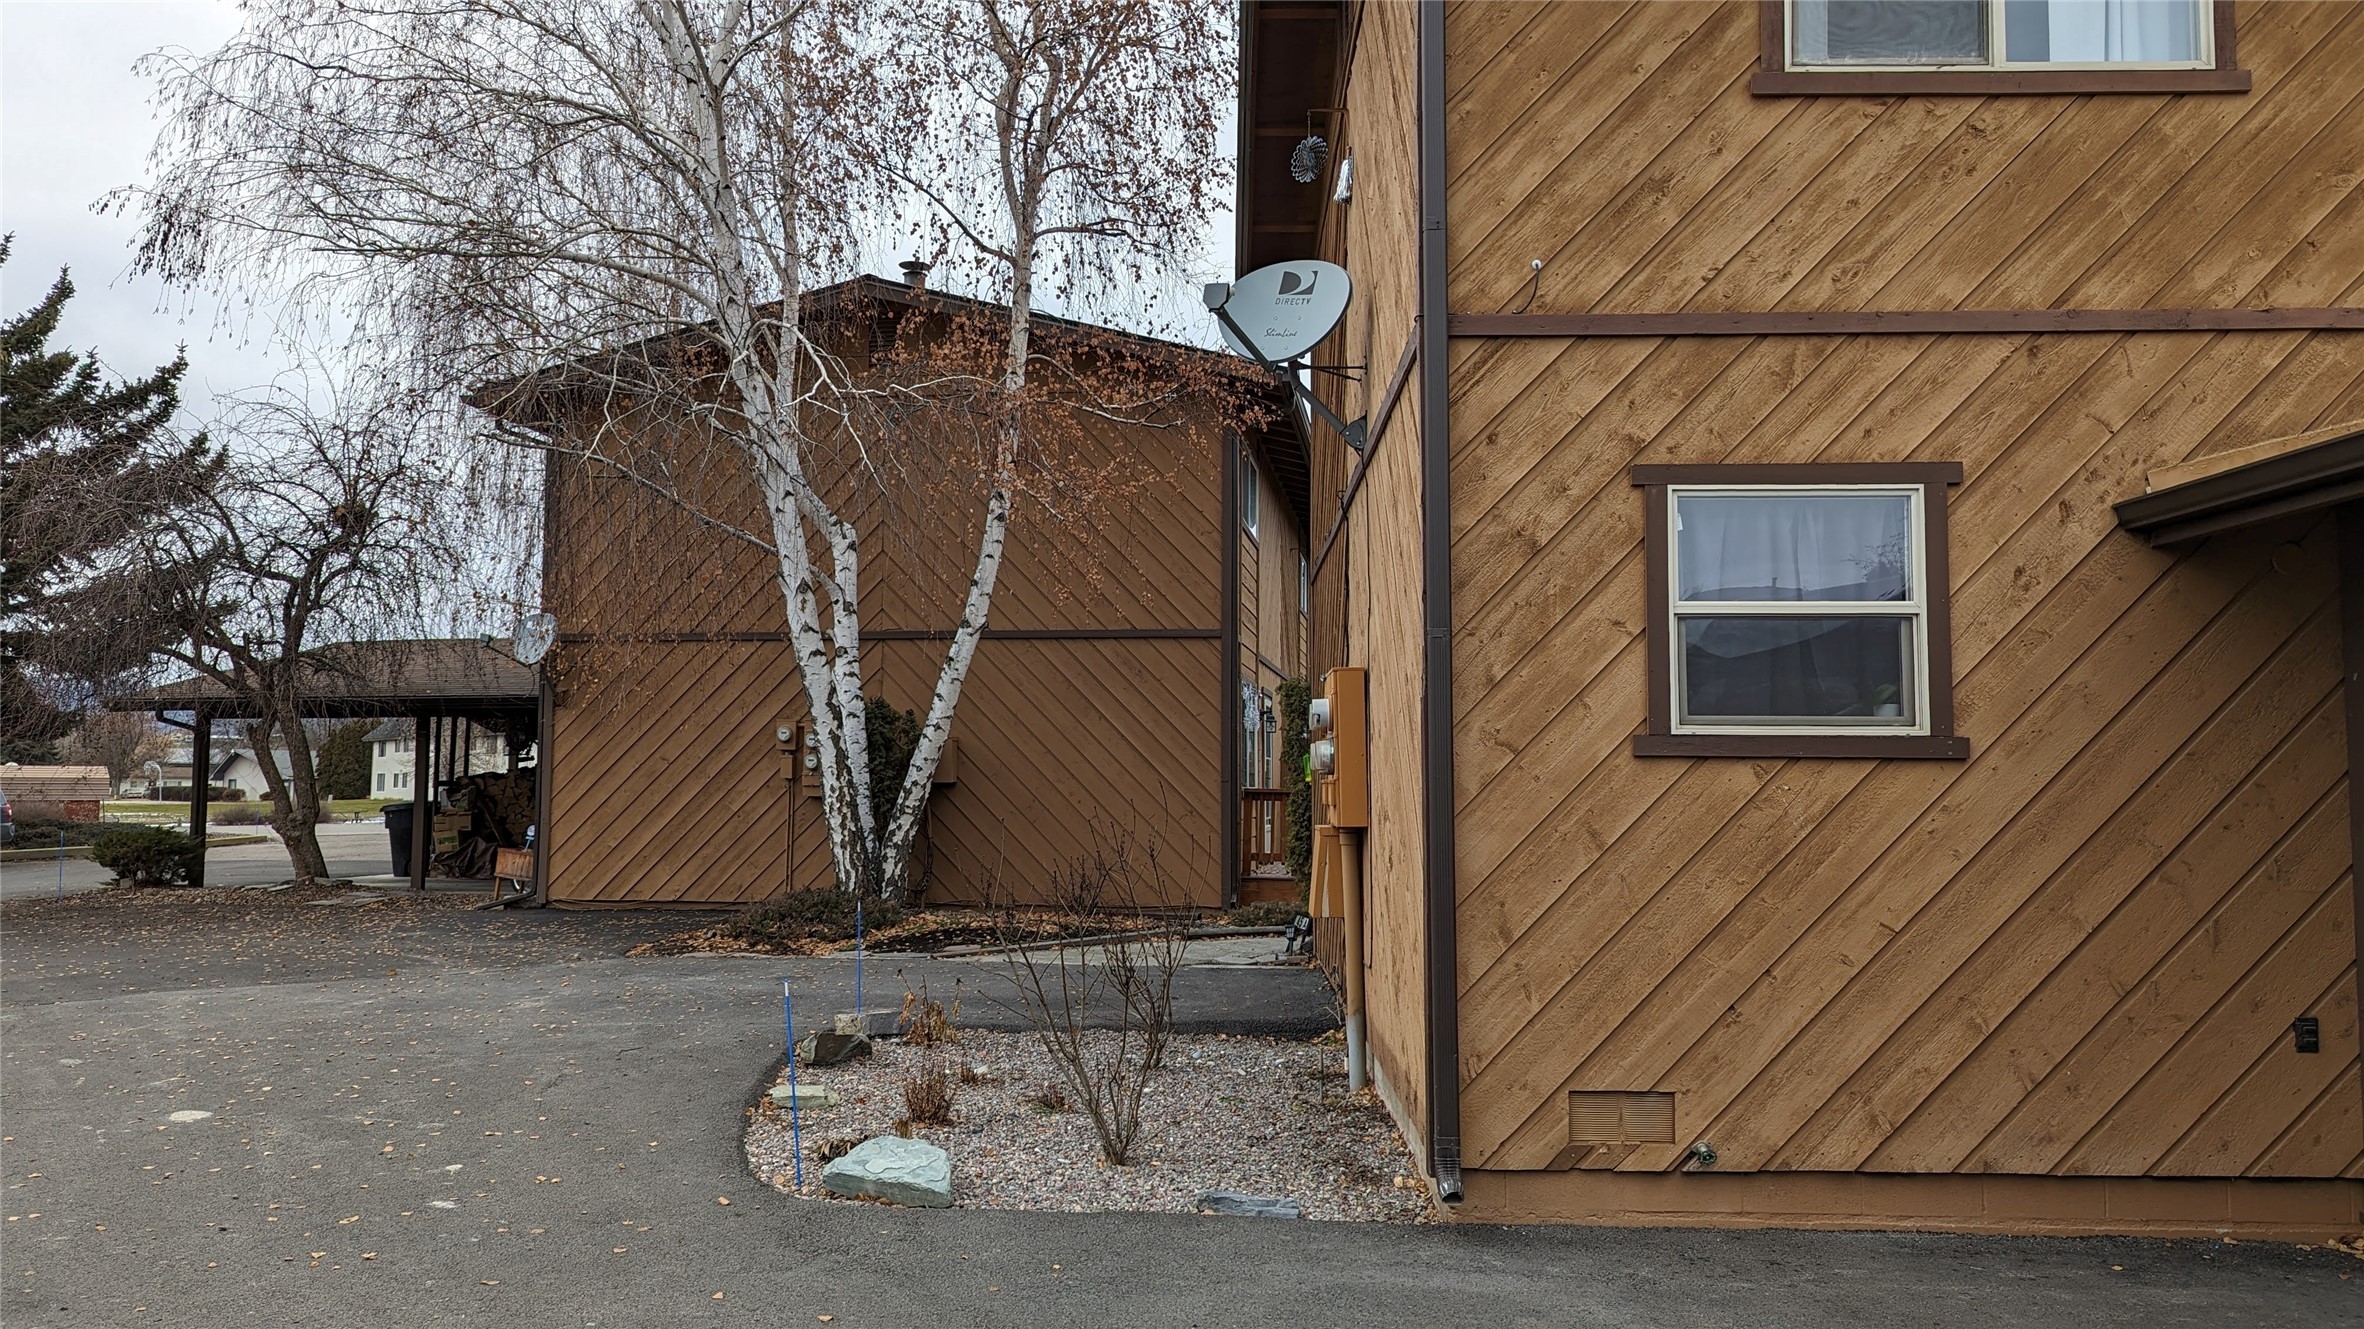 Investment Opportunity in west Kalispell, Montana. This 2 bedroom 1.5 bathroom townhouse with 960 square feet on two levels is currently occupied by a long term tenant. This desirable low maintenance living opportunity is centrally located near shopping, fair grounds, downtown, hospital, and all that our coveted mountain town has to offer. Add this one to your portfolio, with a tenant in place through next year, the timing may align with your plans. Escape to Montana and invest in the future of a caring and growing community. Listed by Eric Perlstein/Brandon Trust